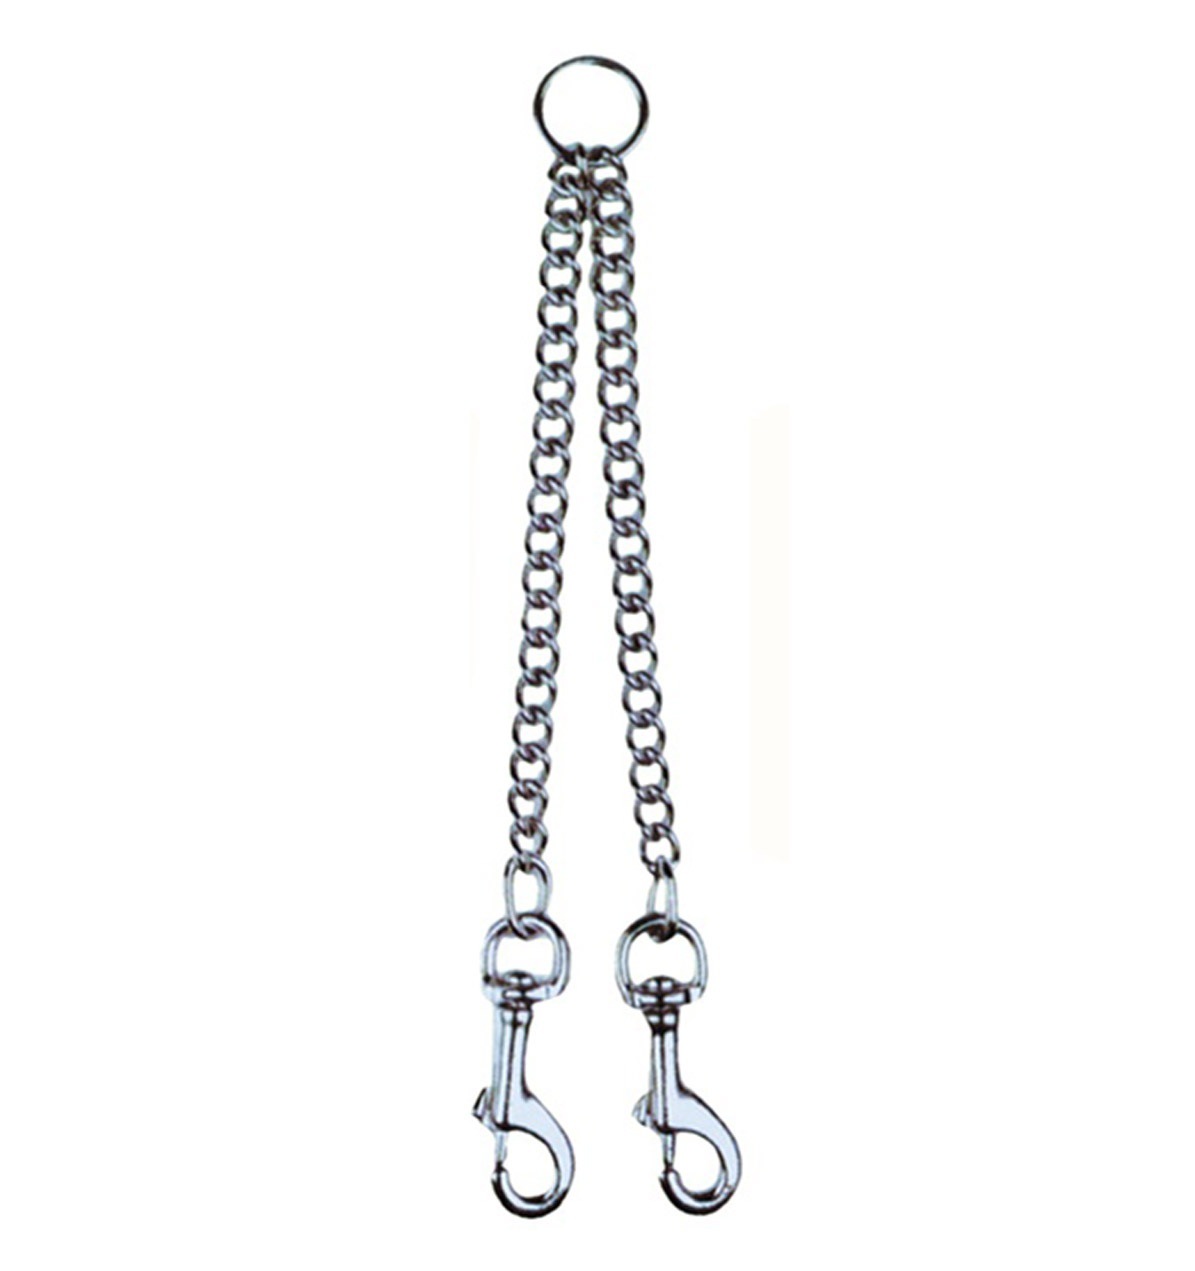 Two Snaps Dog Chain | Paws \u0026 Claws Pets